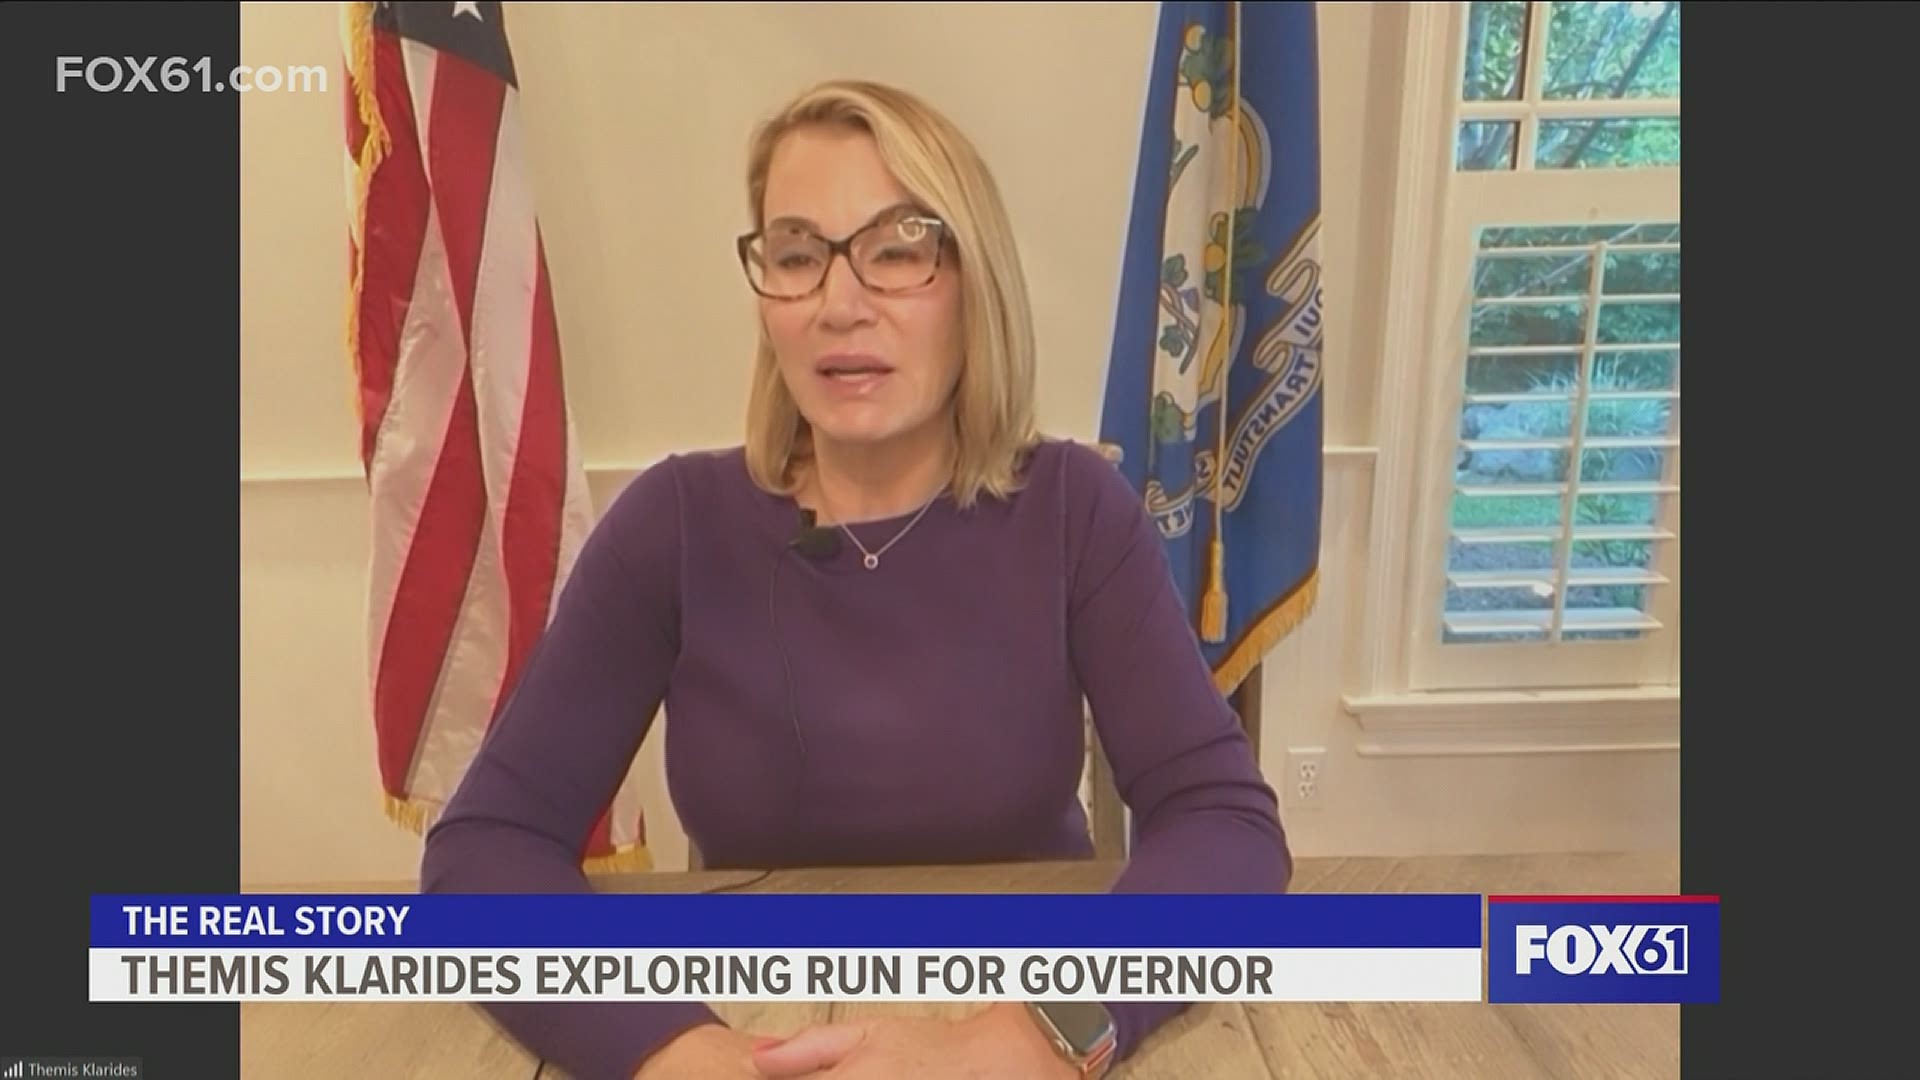 Klarides is exploring a run for governor in 2022